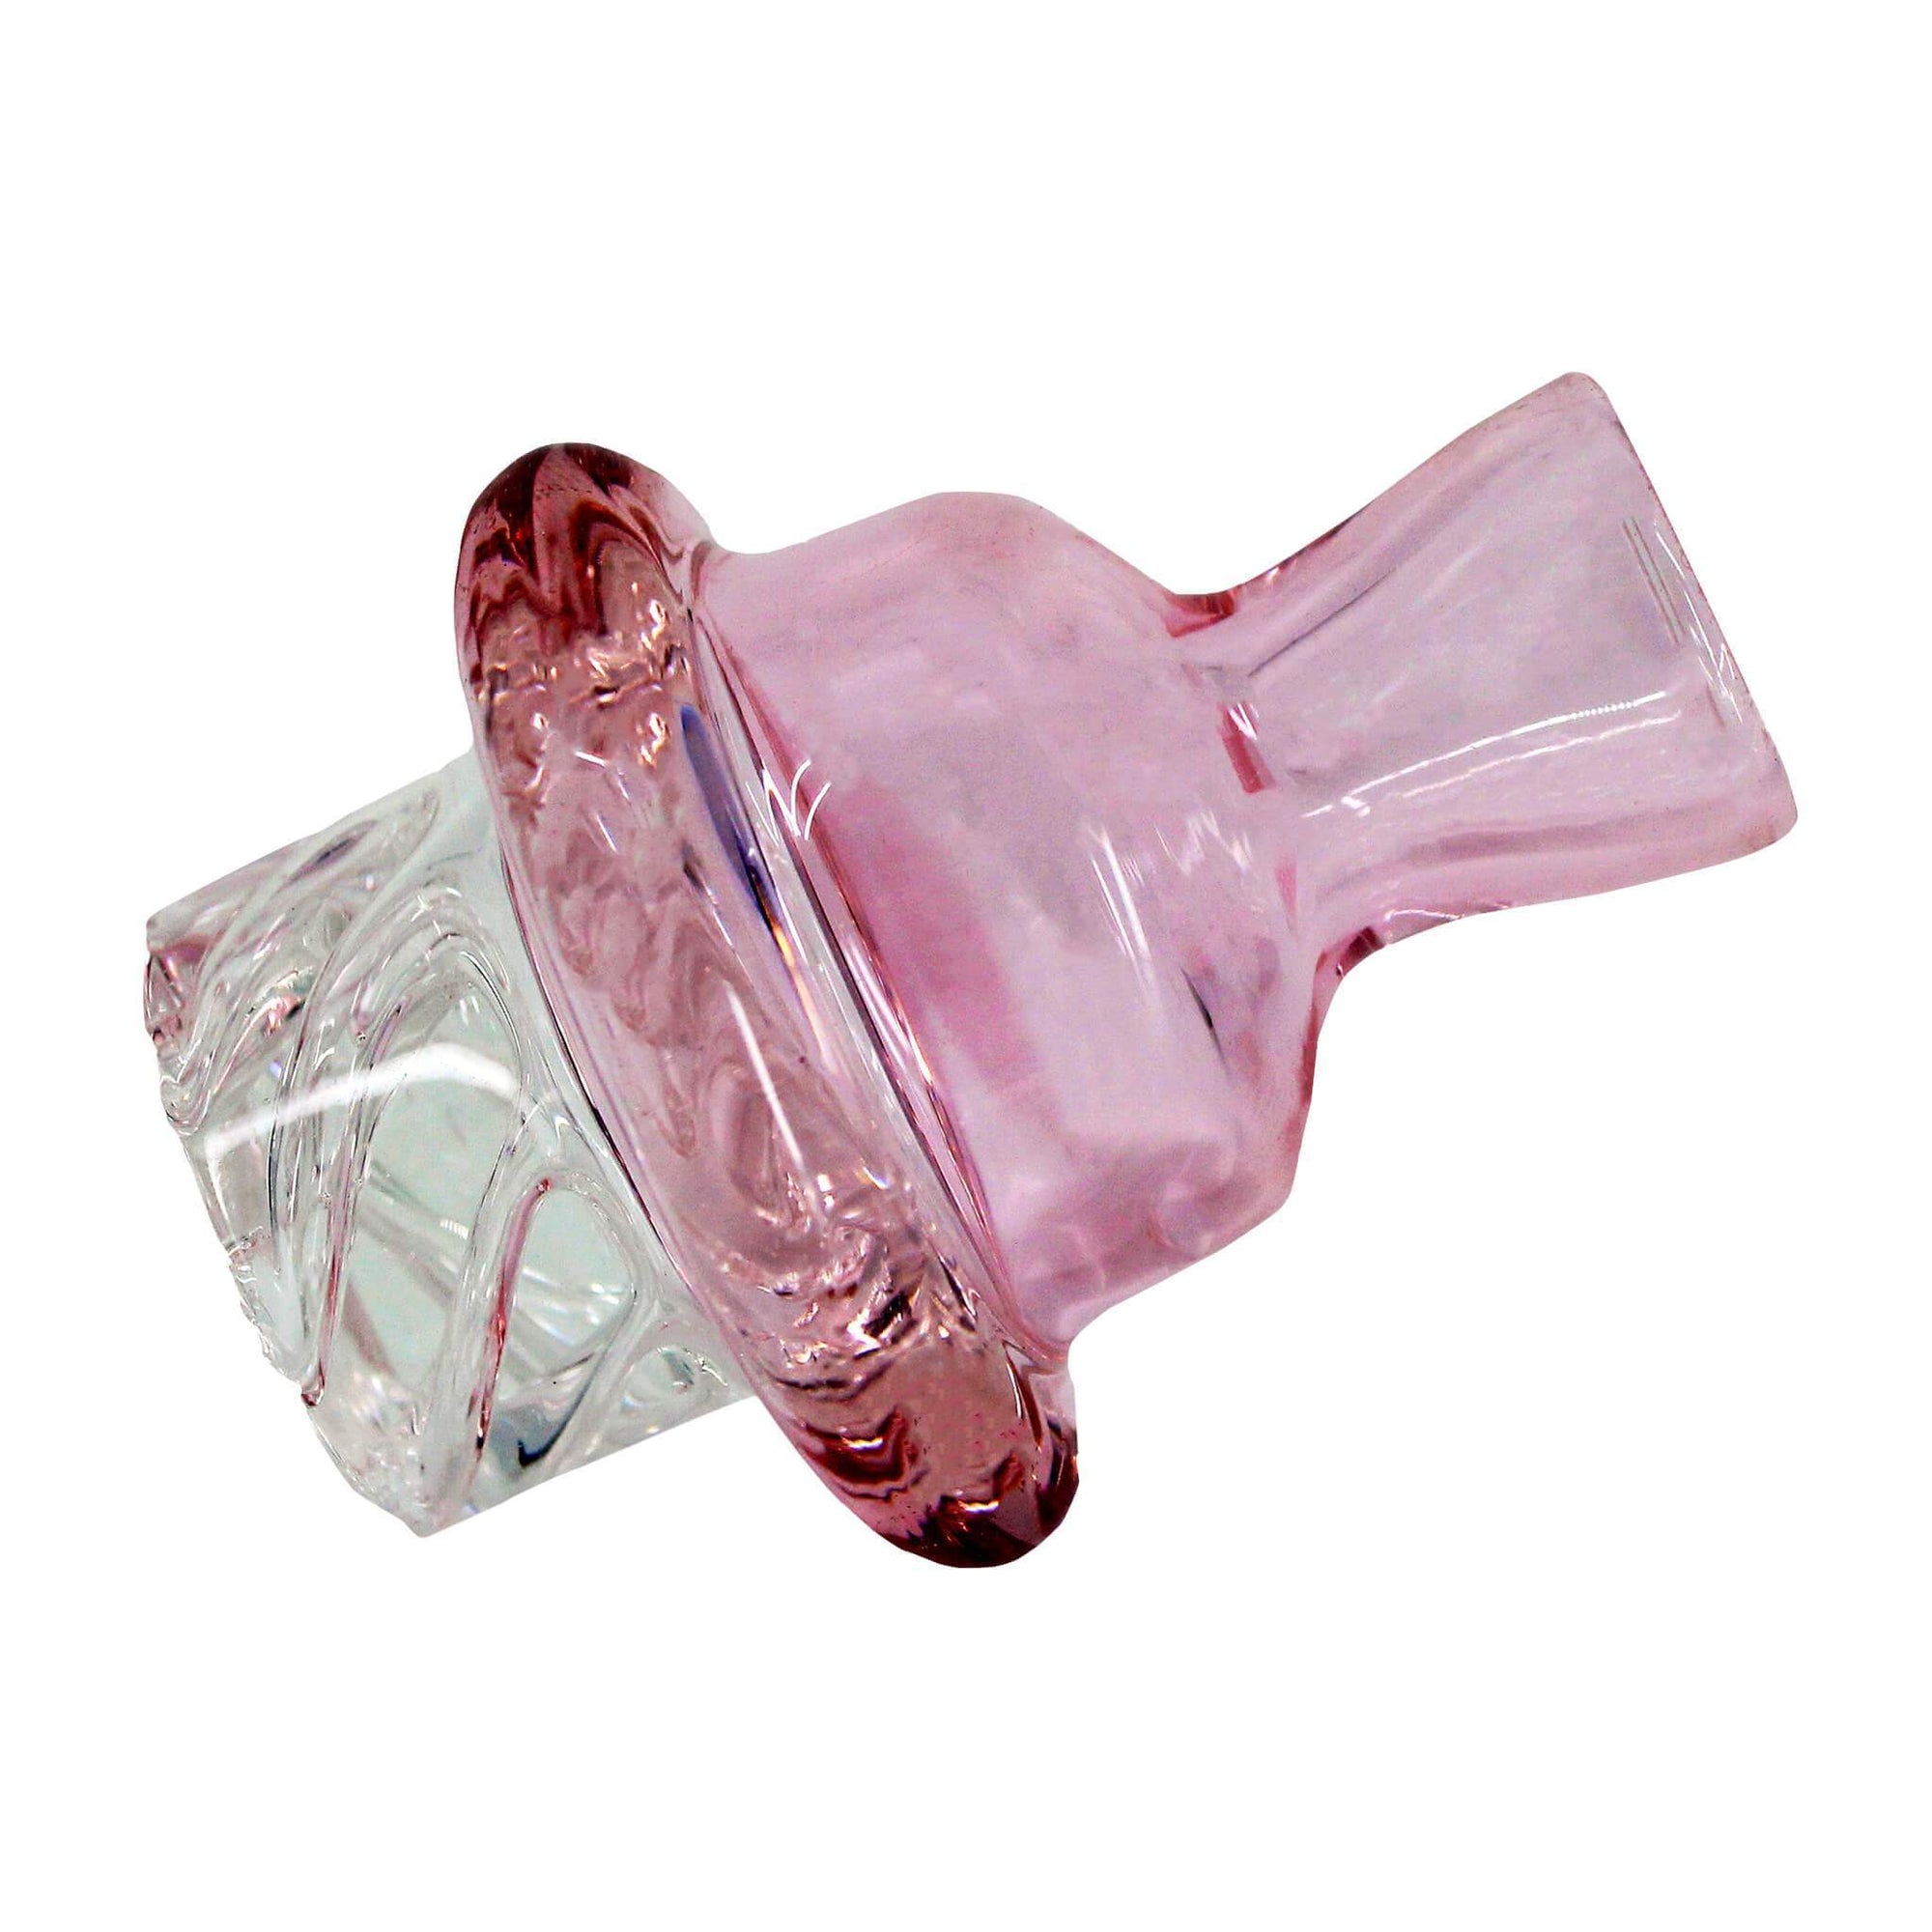 Tiny Hand Dab Rig Complete Kit #3 | Pink Cyclone Spinner Carb Cap View | Dabbing Warehouse